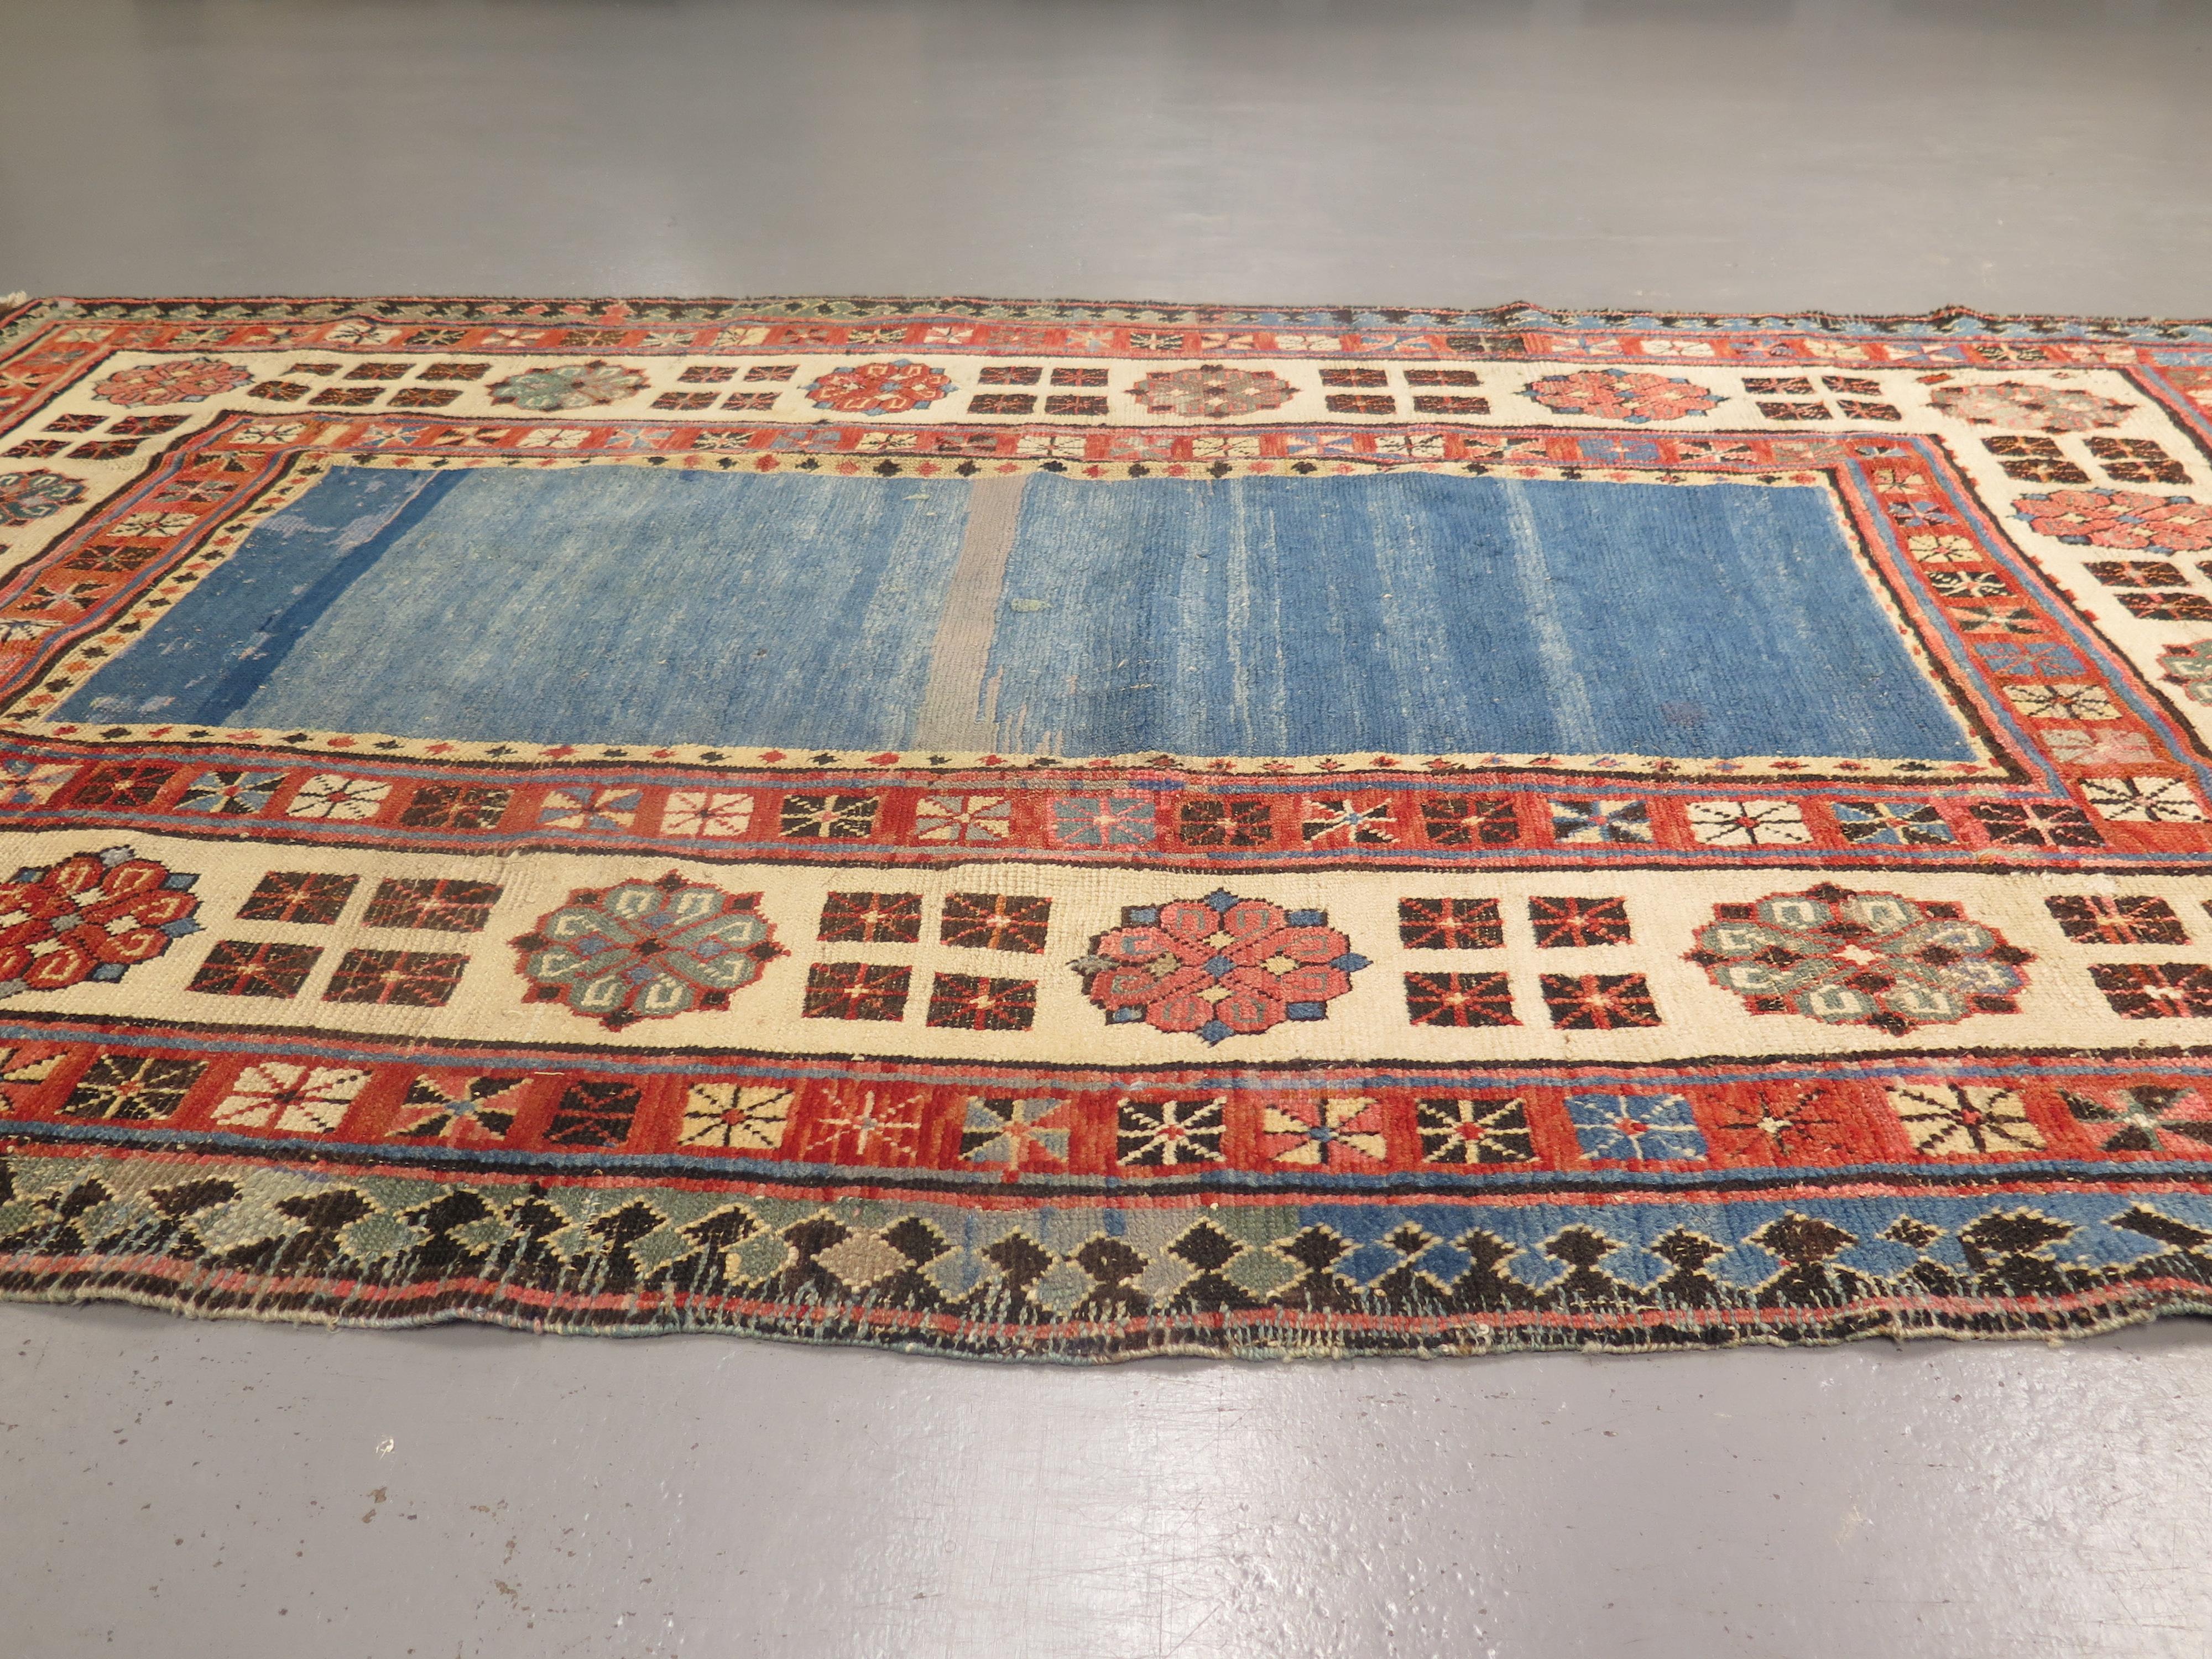 Antique Talish rugs, coming from one of the earliest inhabited regions of modern-day Azerbaijan, are well-known for their unique drawing and high-quality wool, as well as for a tendency to employ floral motifs, rather than the geometric designs that